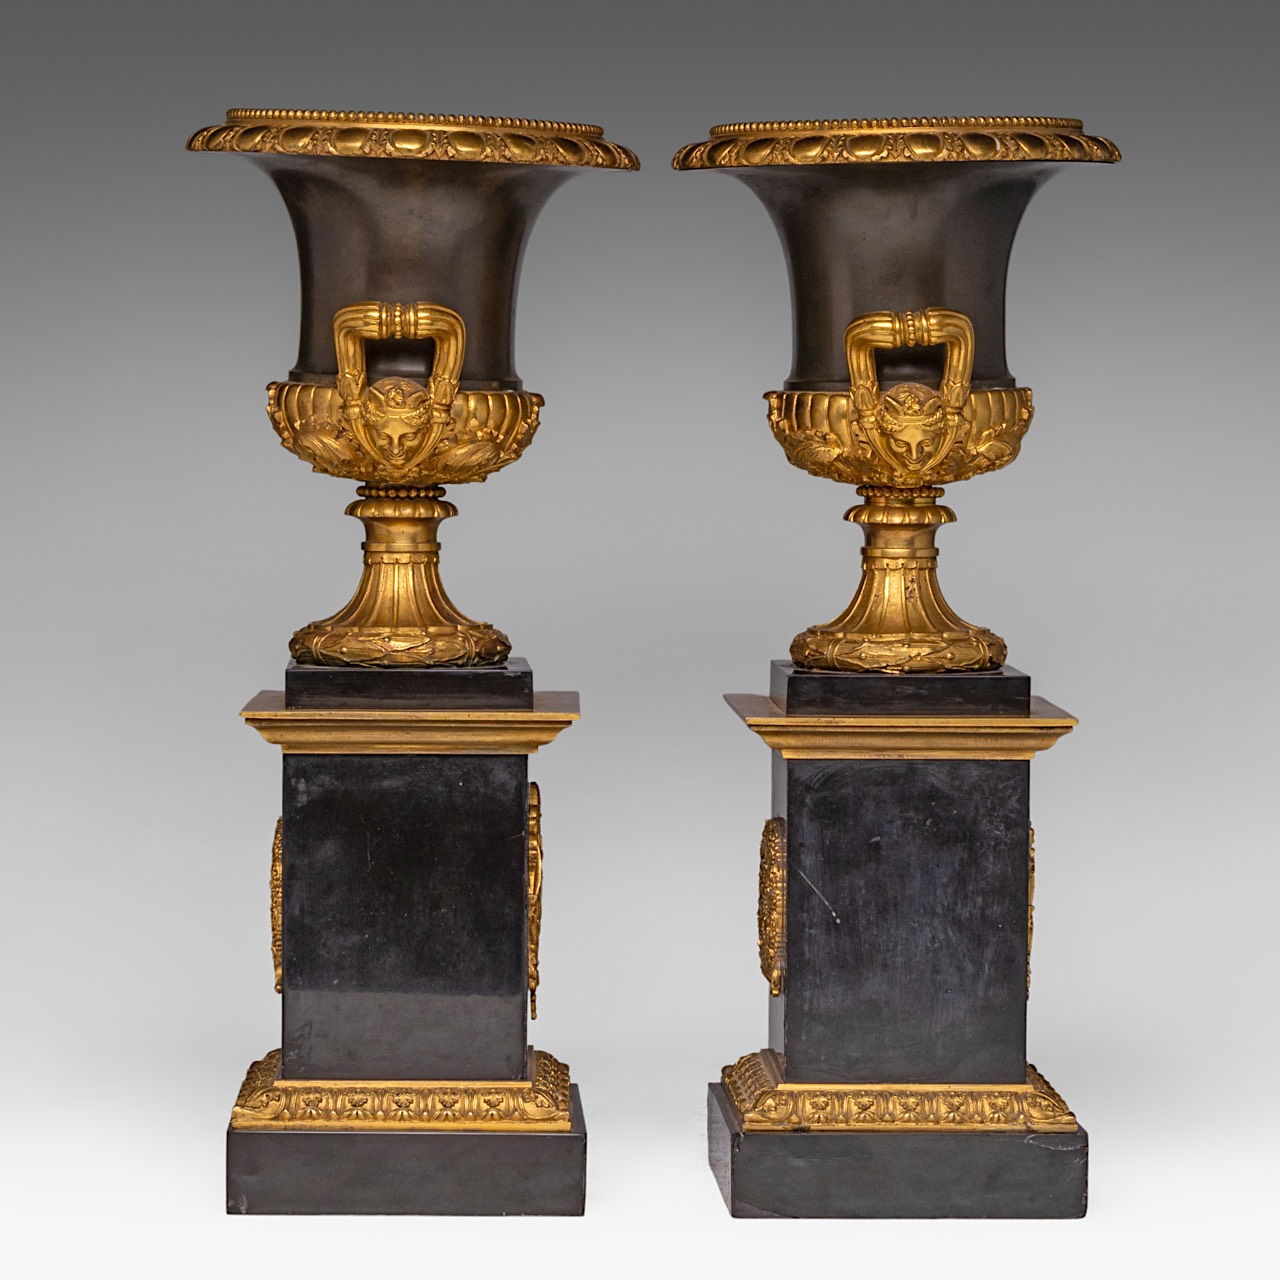 A fine pair of Neoclassical patinated and gilt bronze and black marble Medici type vases, H 45 cm - Image 4 of 5